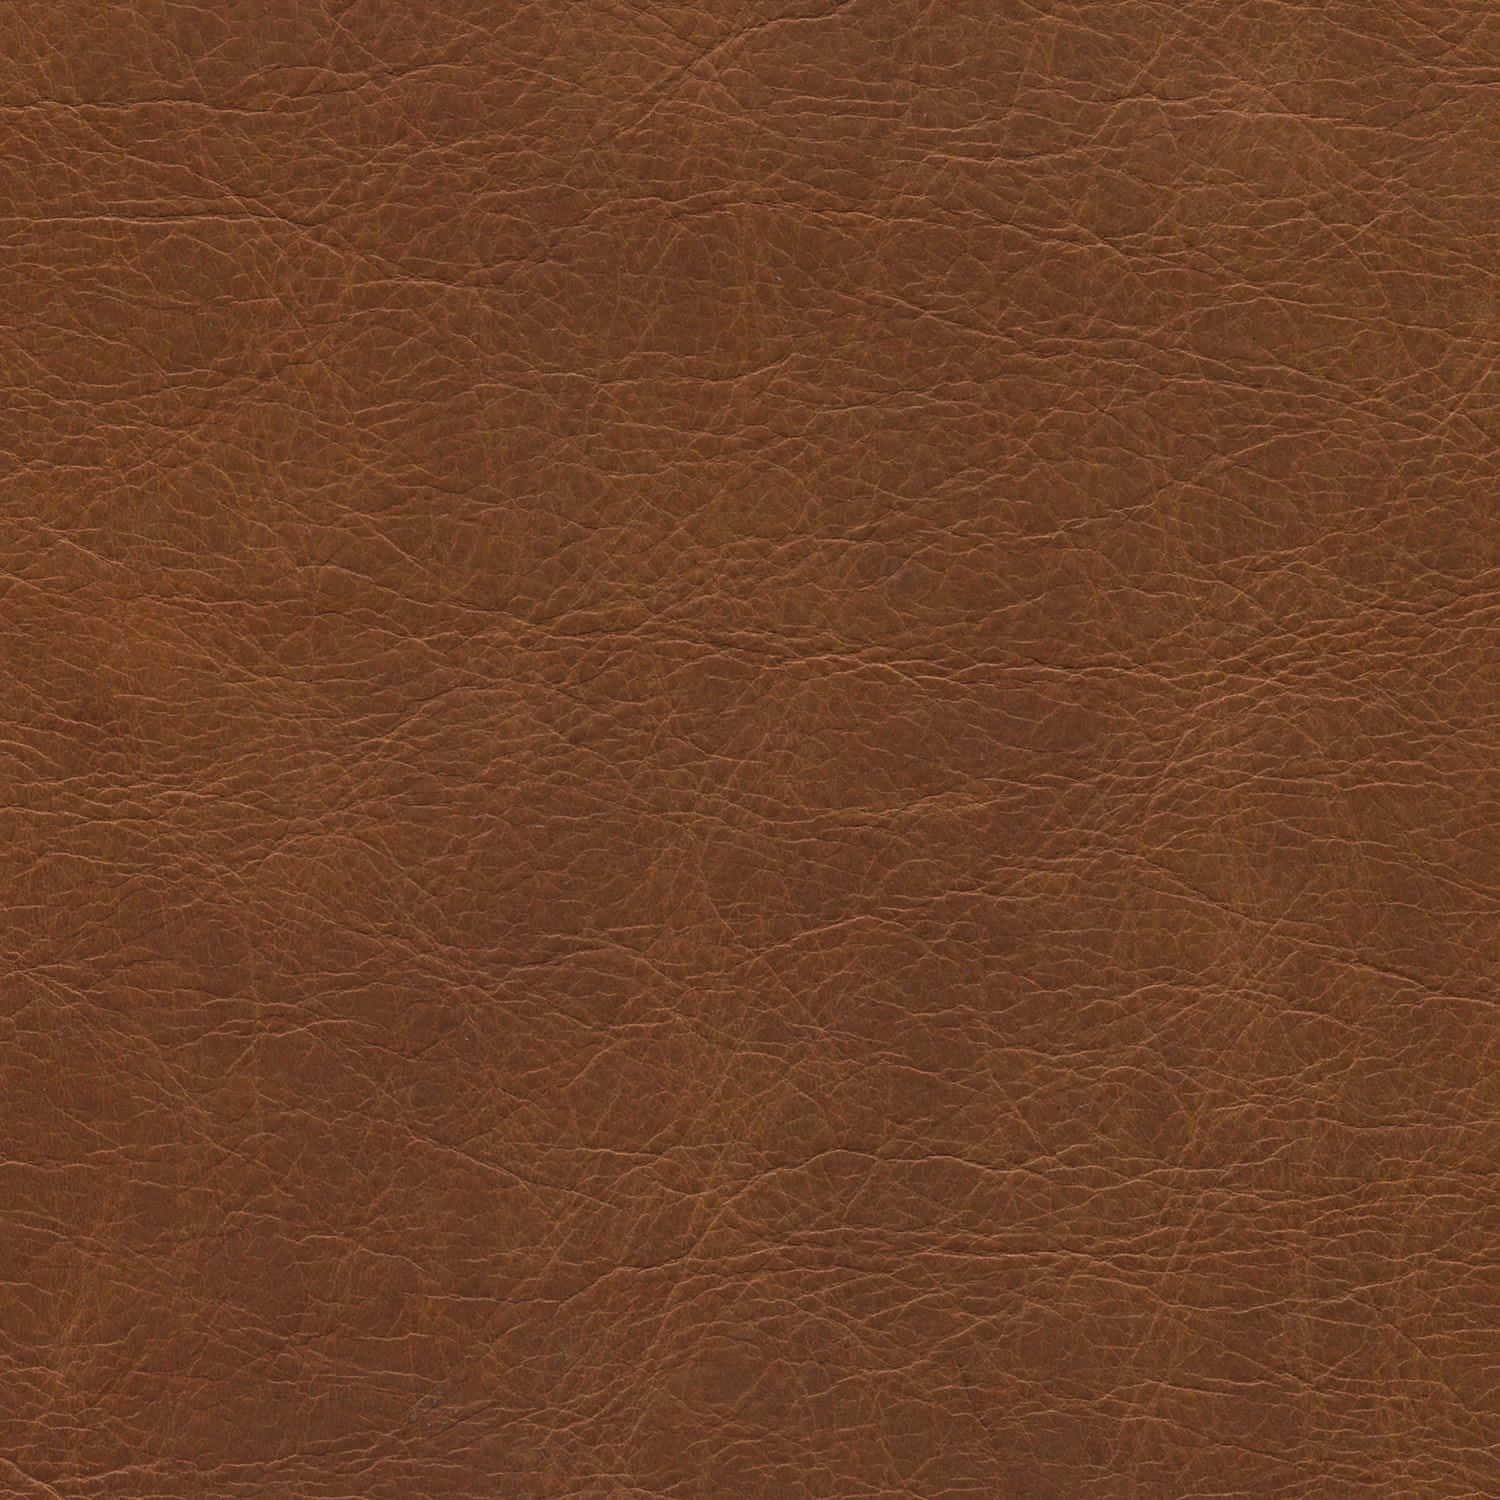 Luxurious Brown Leather Texture